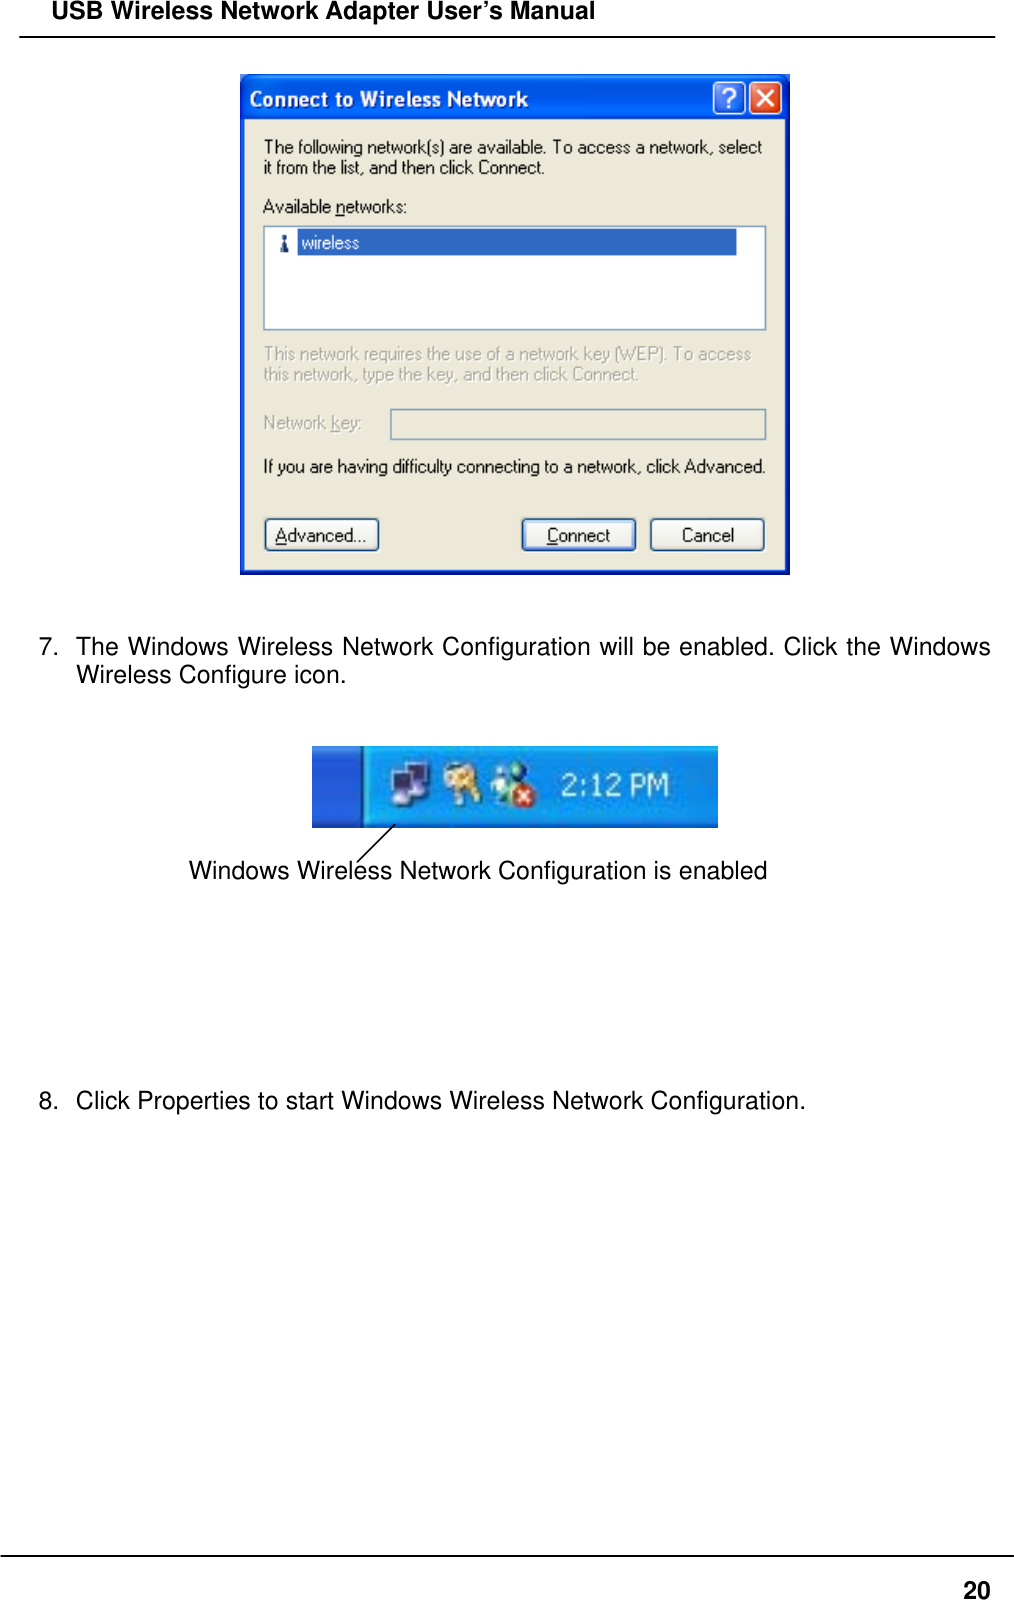   USB Wireless Network Adapter User’s Manual    7.  The Windows Wireless Network Configuration will be enabled. Click the Windows Wireless Configure icon.     Windows Wireless Network Configuration is enabled        8.  Click Properties to start Windows Wireless Network Configuration.    20